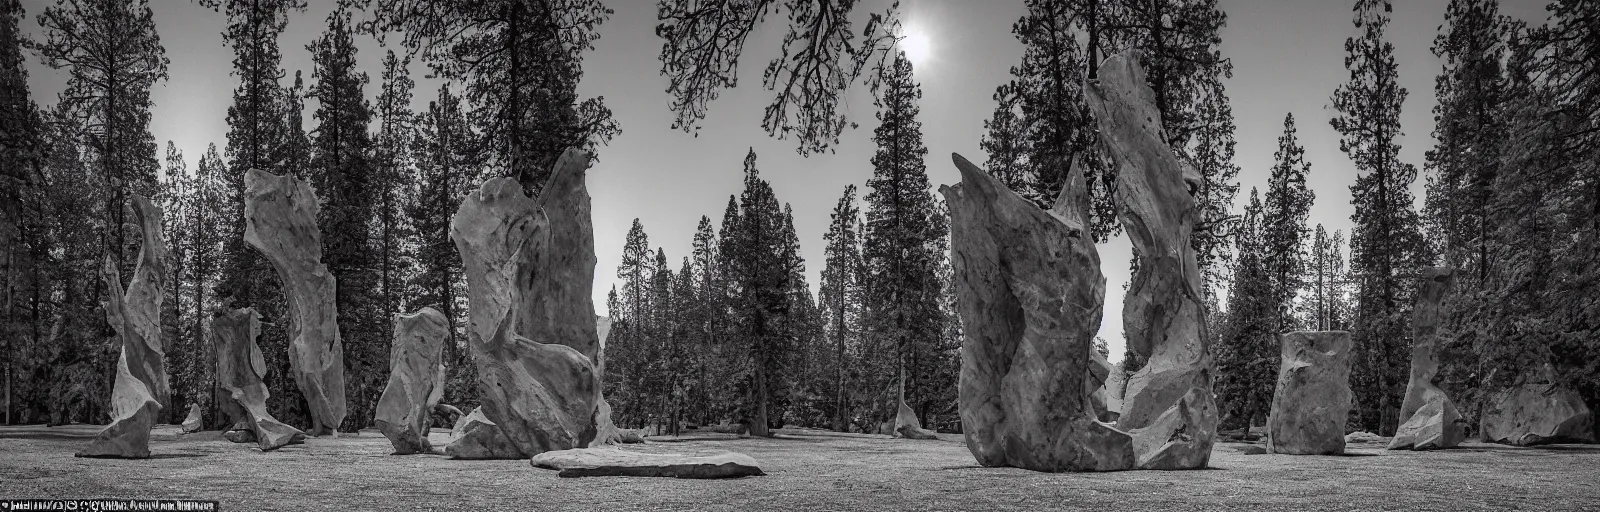 Image similar to to fathom hell or soar angelic, just take a pinch of psychedelic, medium format photograph of two colossal minimalistic necktie sculpture installations by antony gormley and anthony caro in yosemite national park, made from iron and marble, granite peaks visible in the background, taken in the night